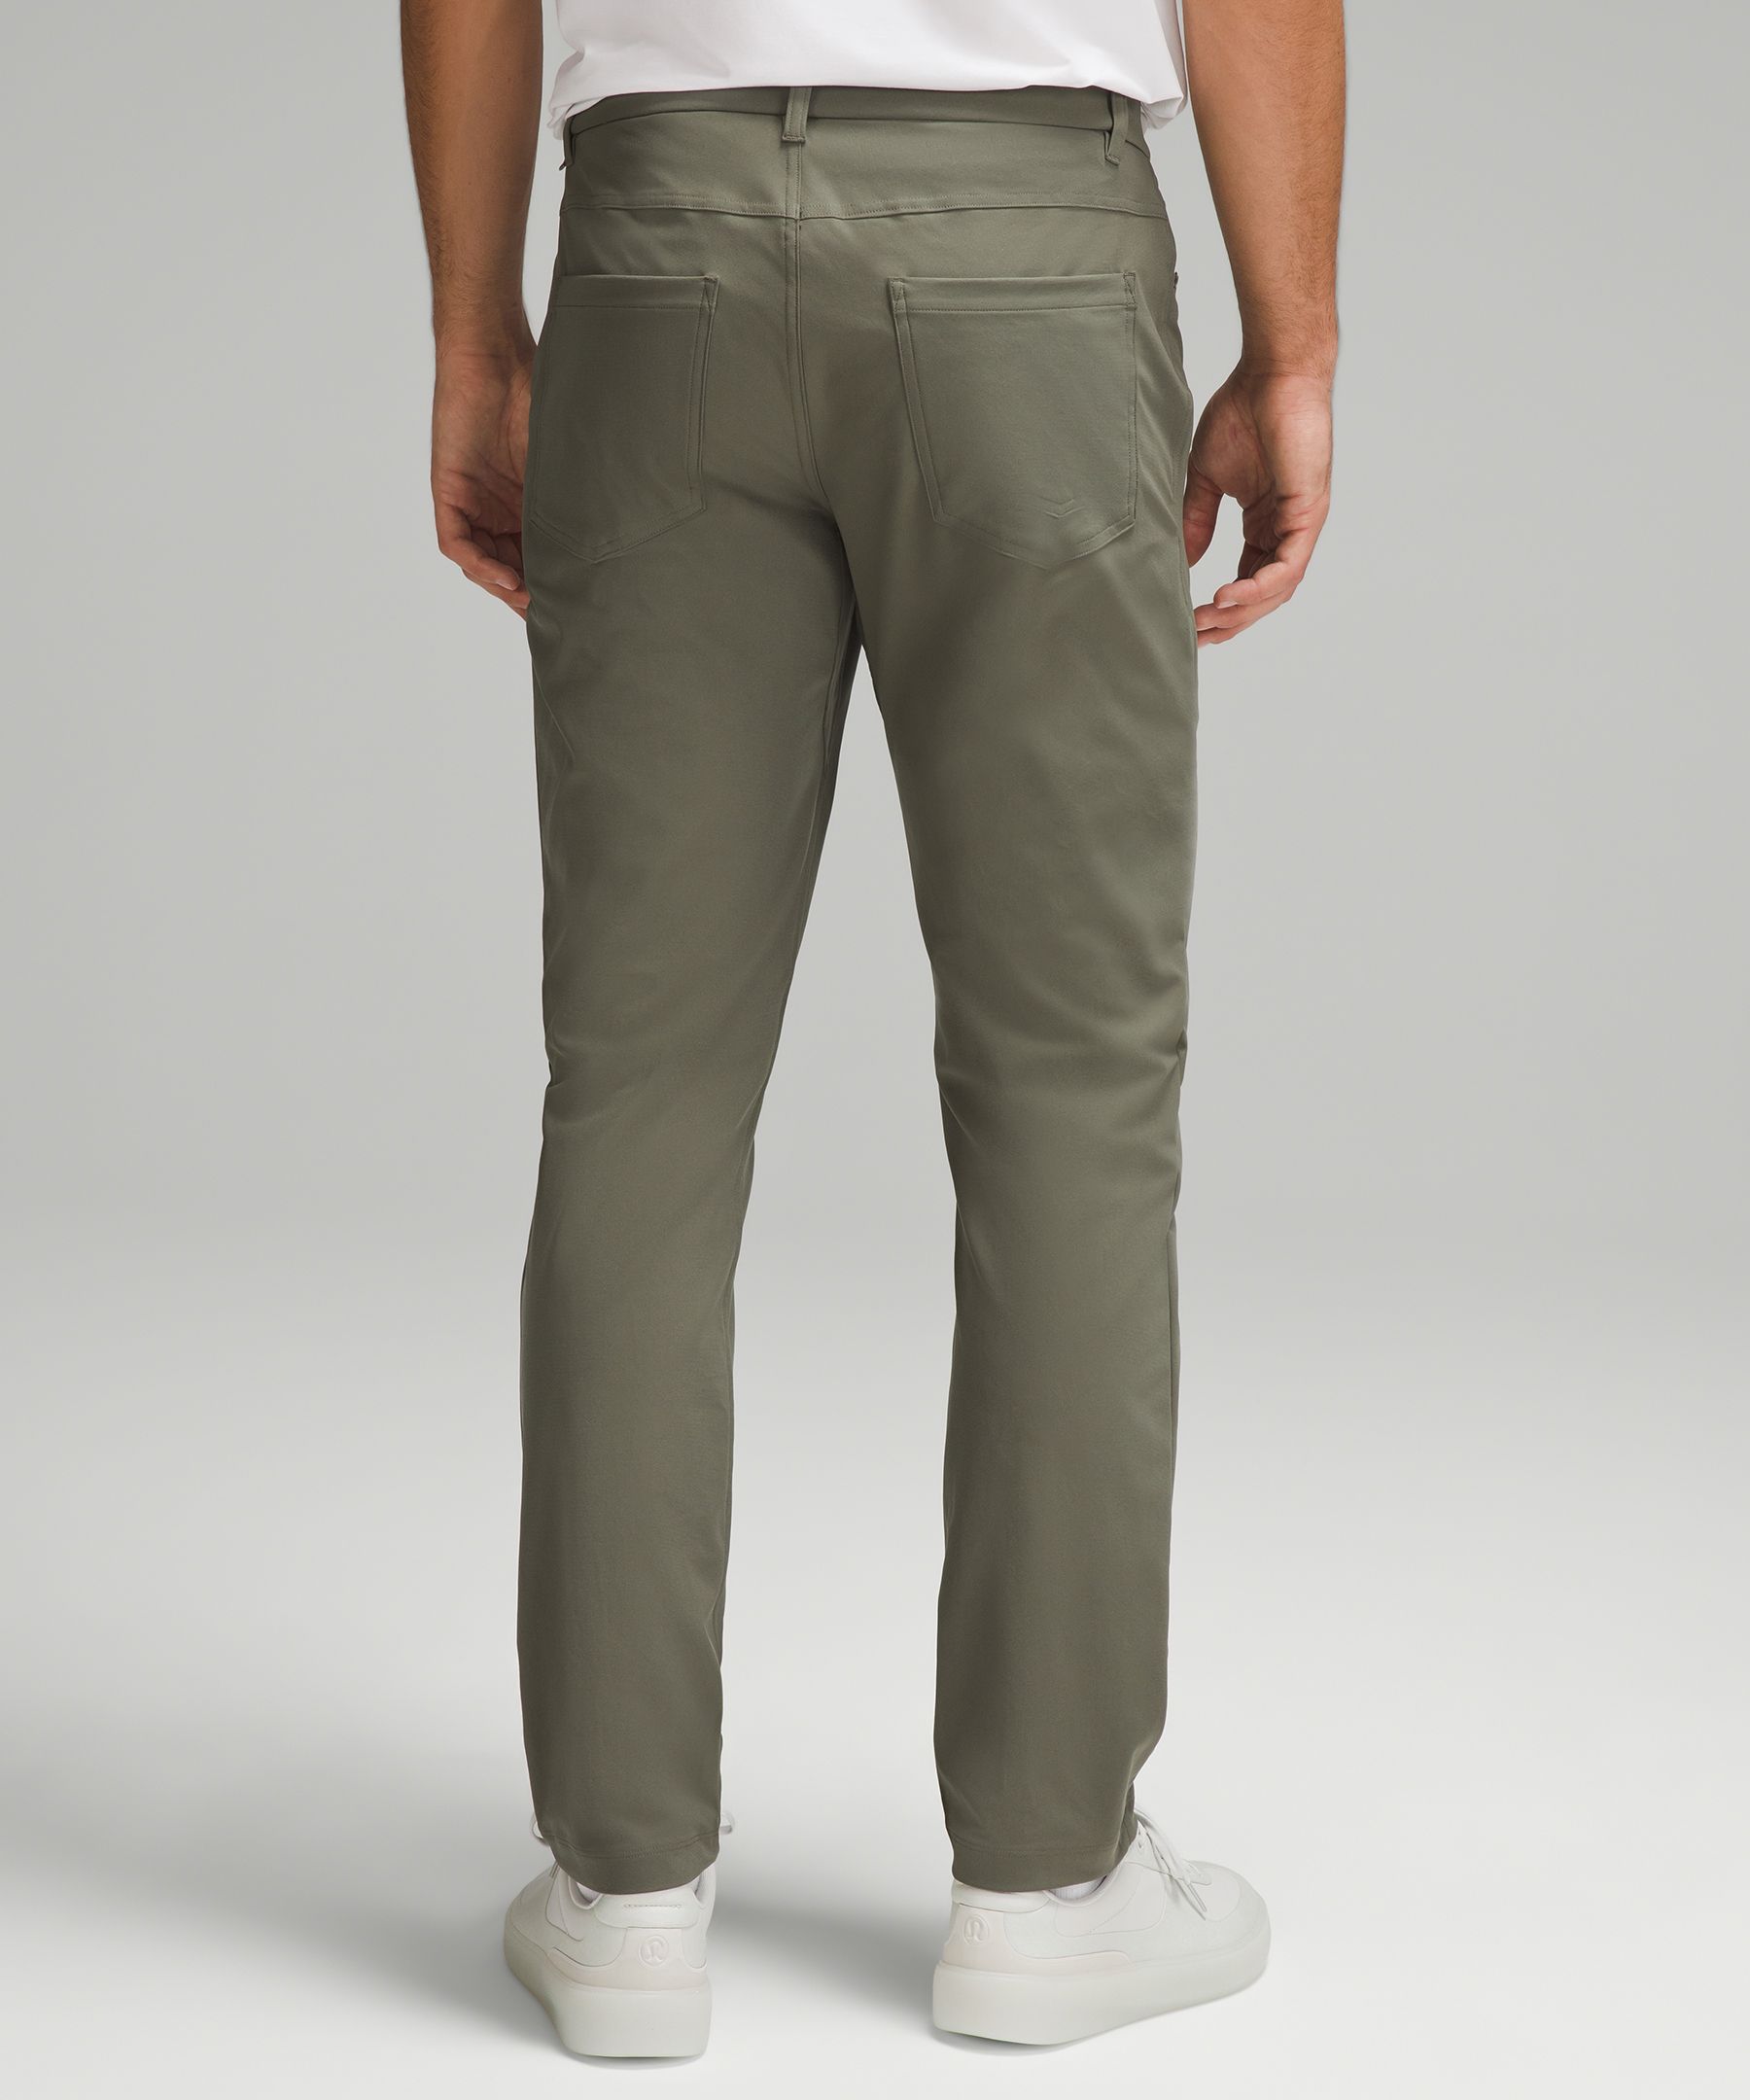 lululemon athletica Abc Classic-fit 5 Pocket Trousers 30l Warpstreme -  Color Brown - Size 28 in Natural for Men